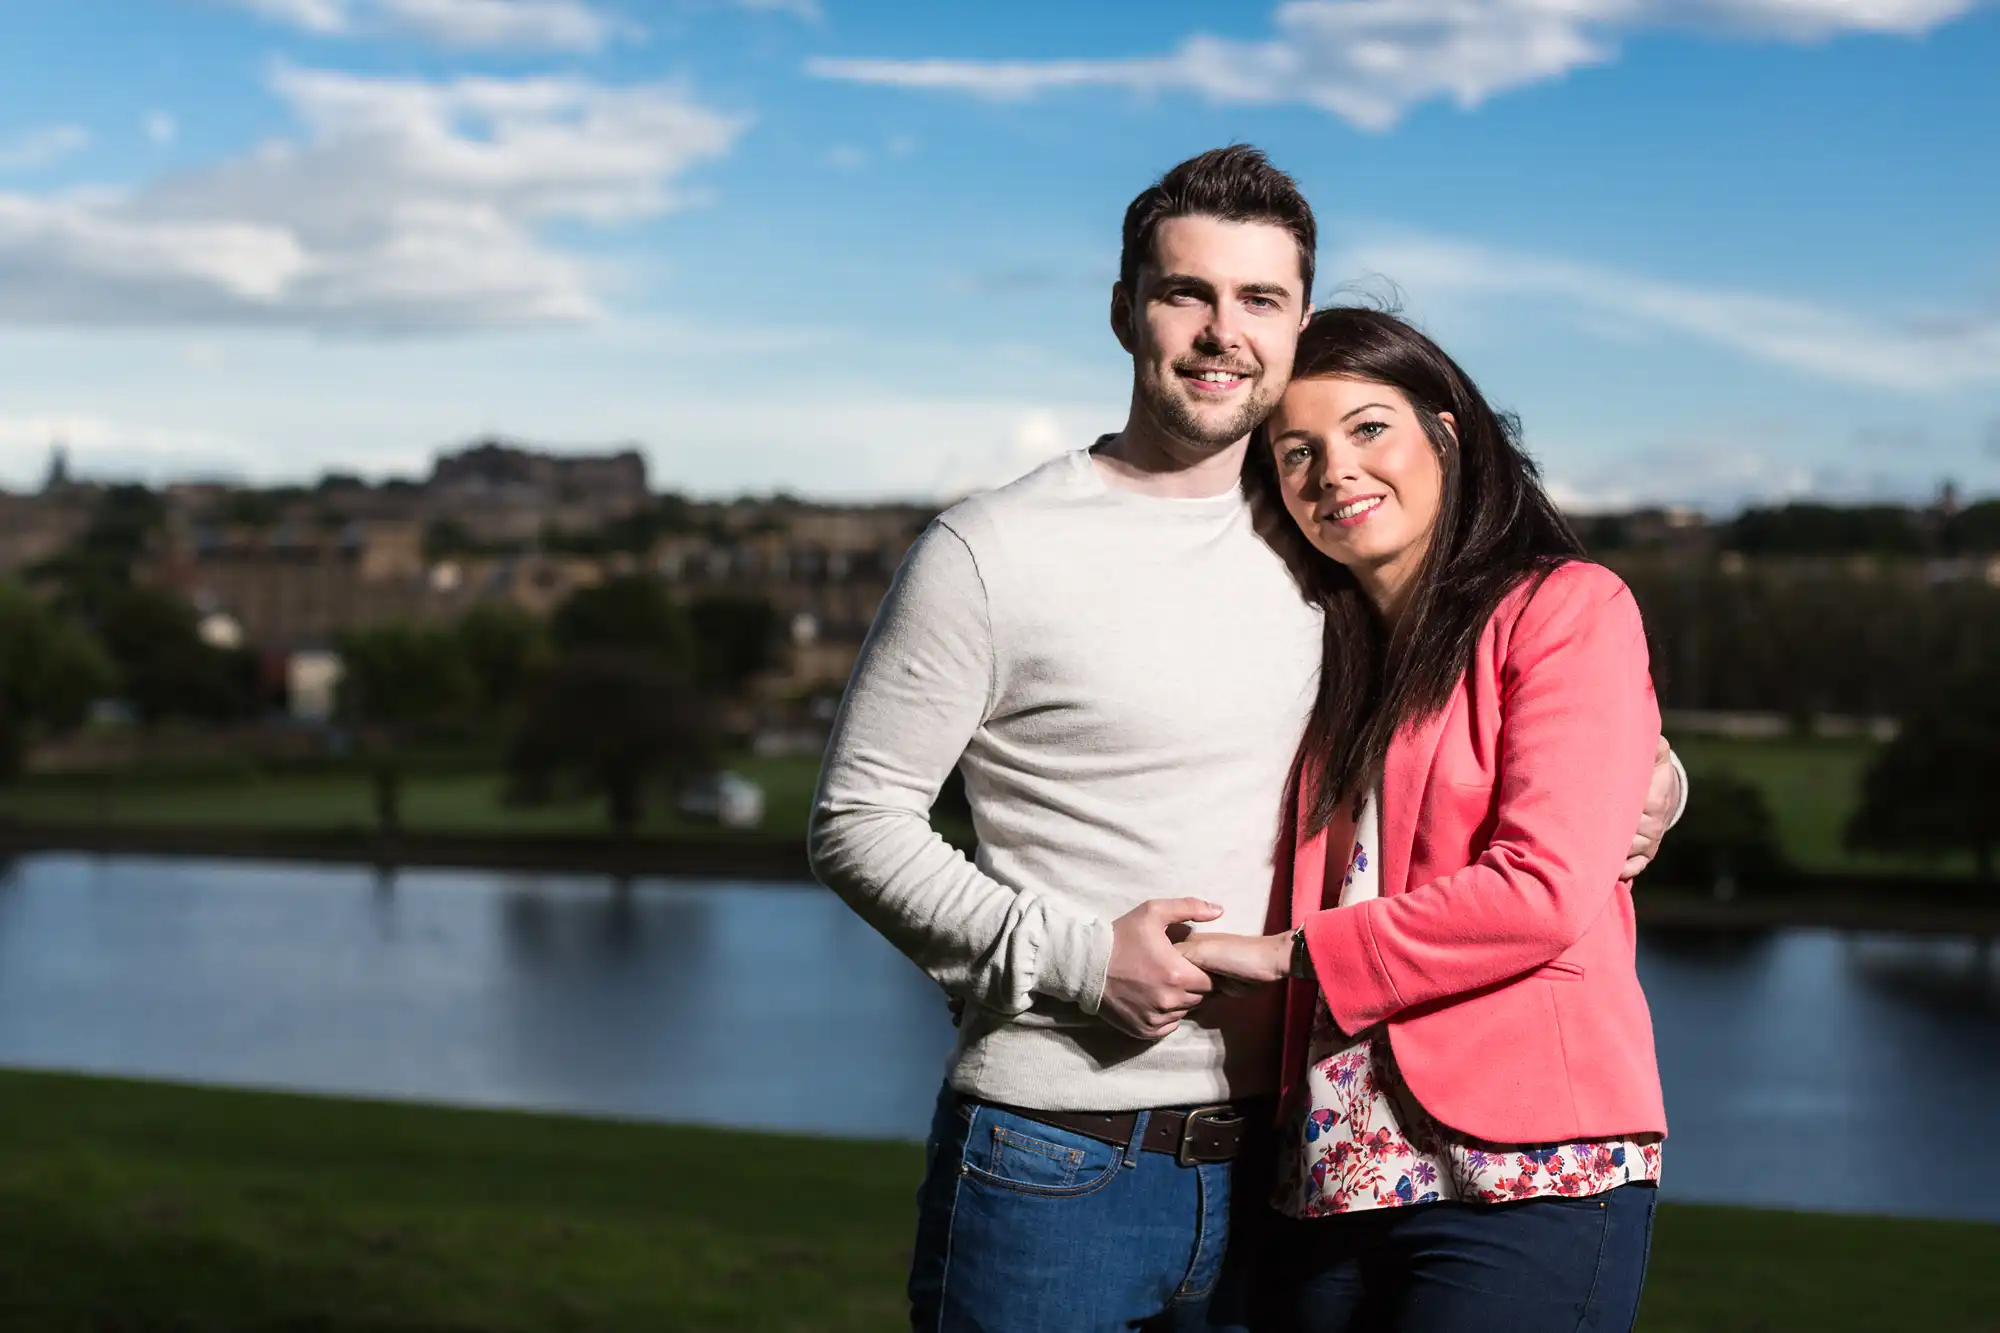 A smiling couple embracing outdoors with a cityscape and river in the background on a sunny day.